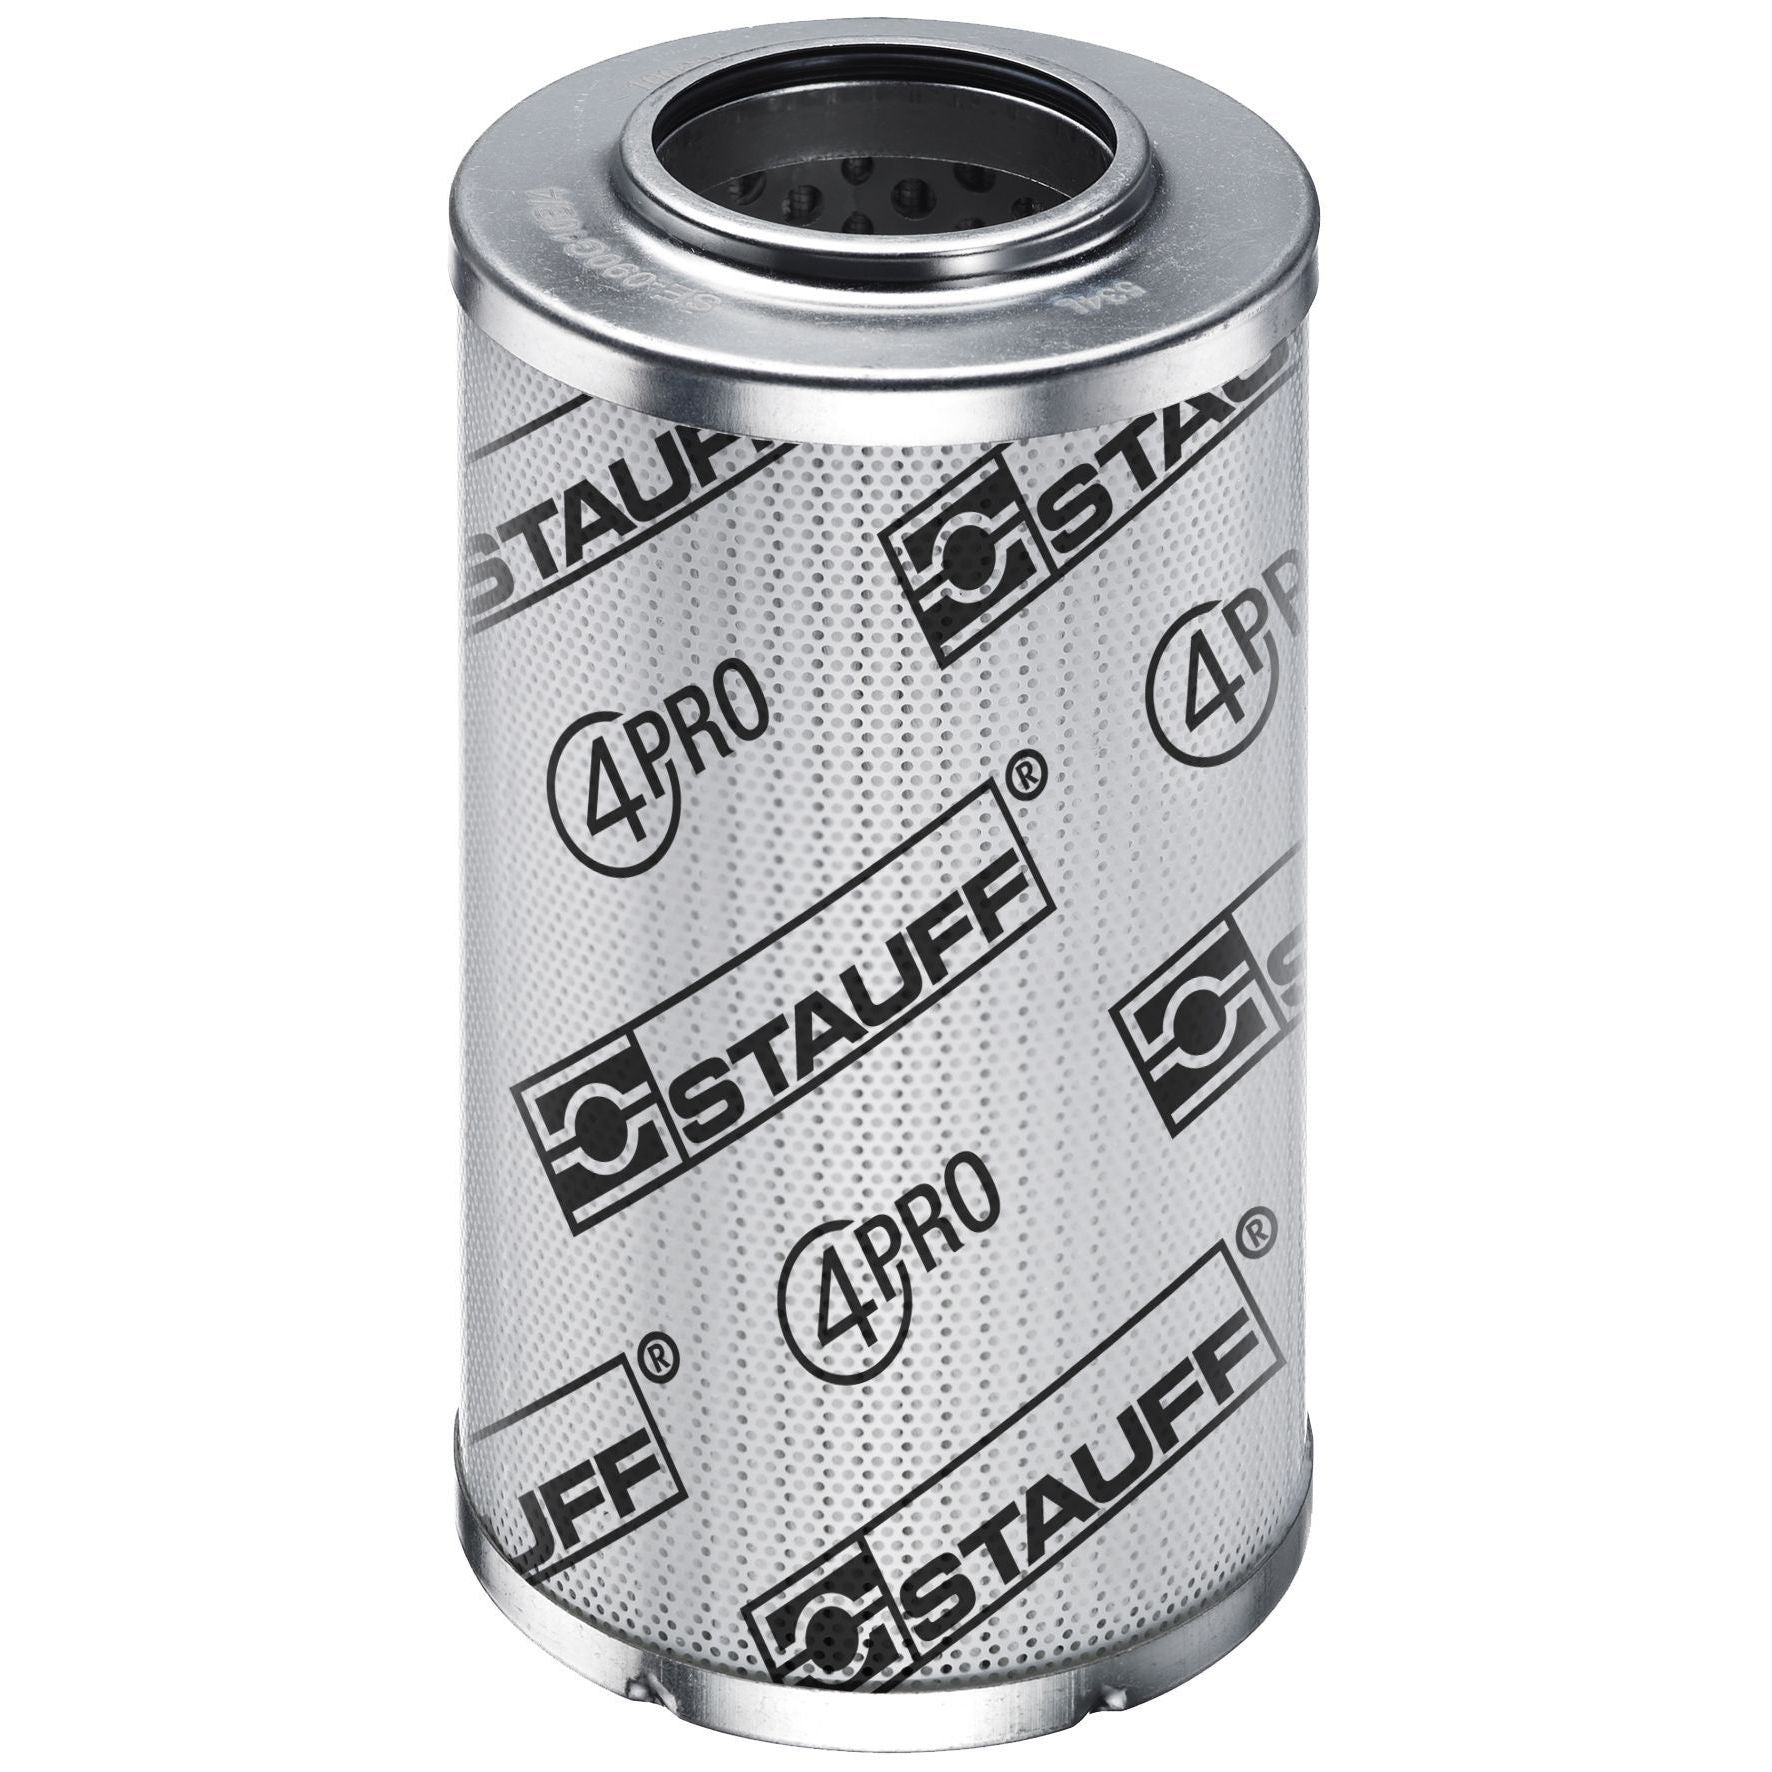 SE-014-H-10-V/4 : Stauff SF-014 Series Filter Element, 10 Micron, Synthetic, 3045psi Collapse Differential, Viton Seals